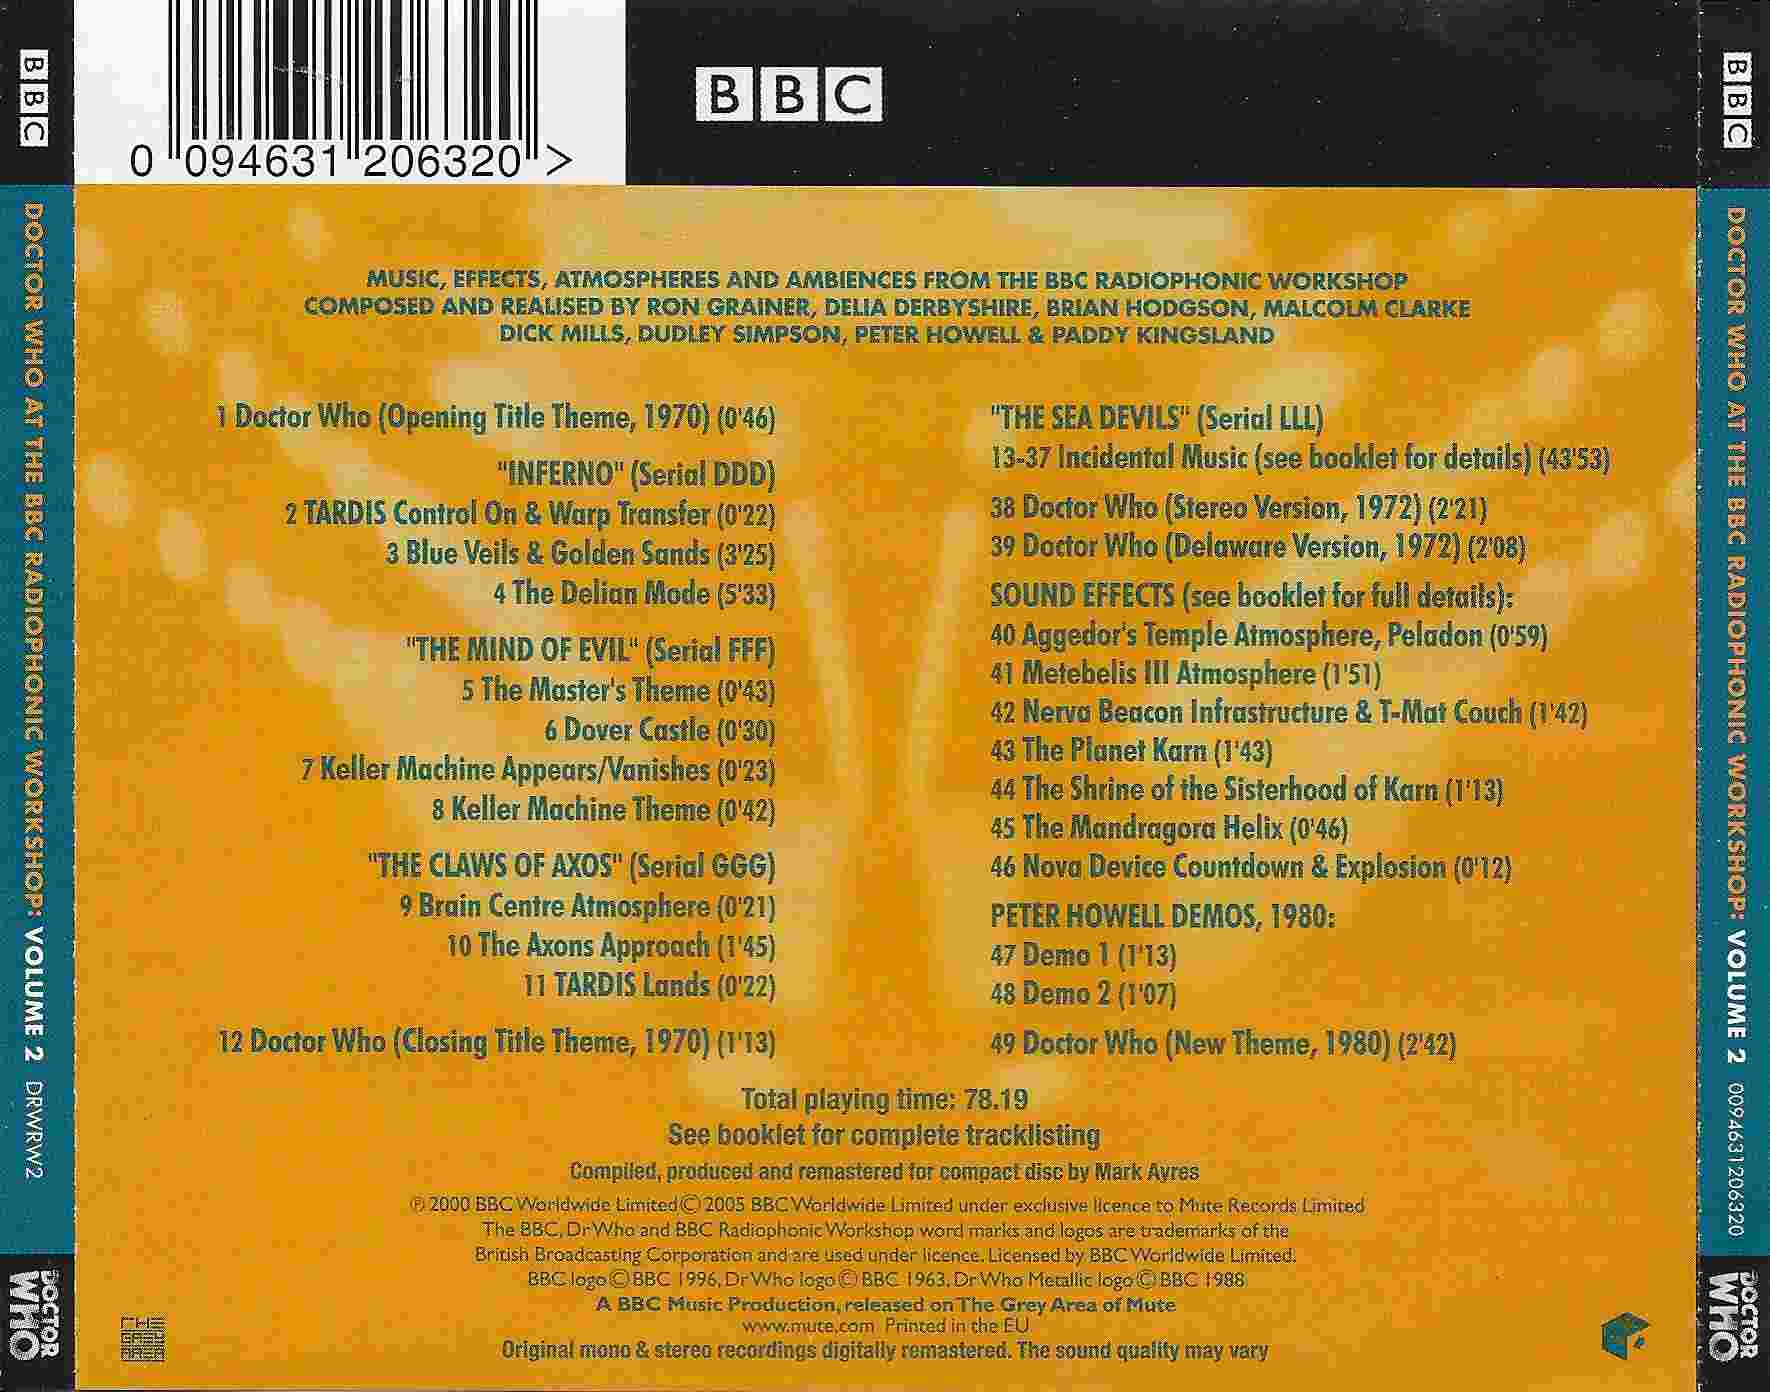 Picture of DRWRW 2 Doctor Who - At the radiophonic workshop - Volume 2 by artist Various from the BBC records and Tapes library